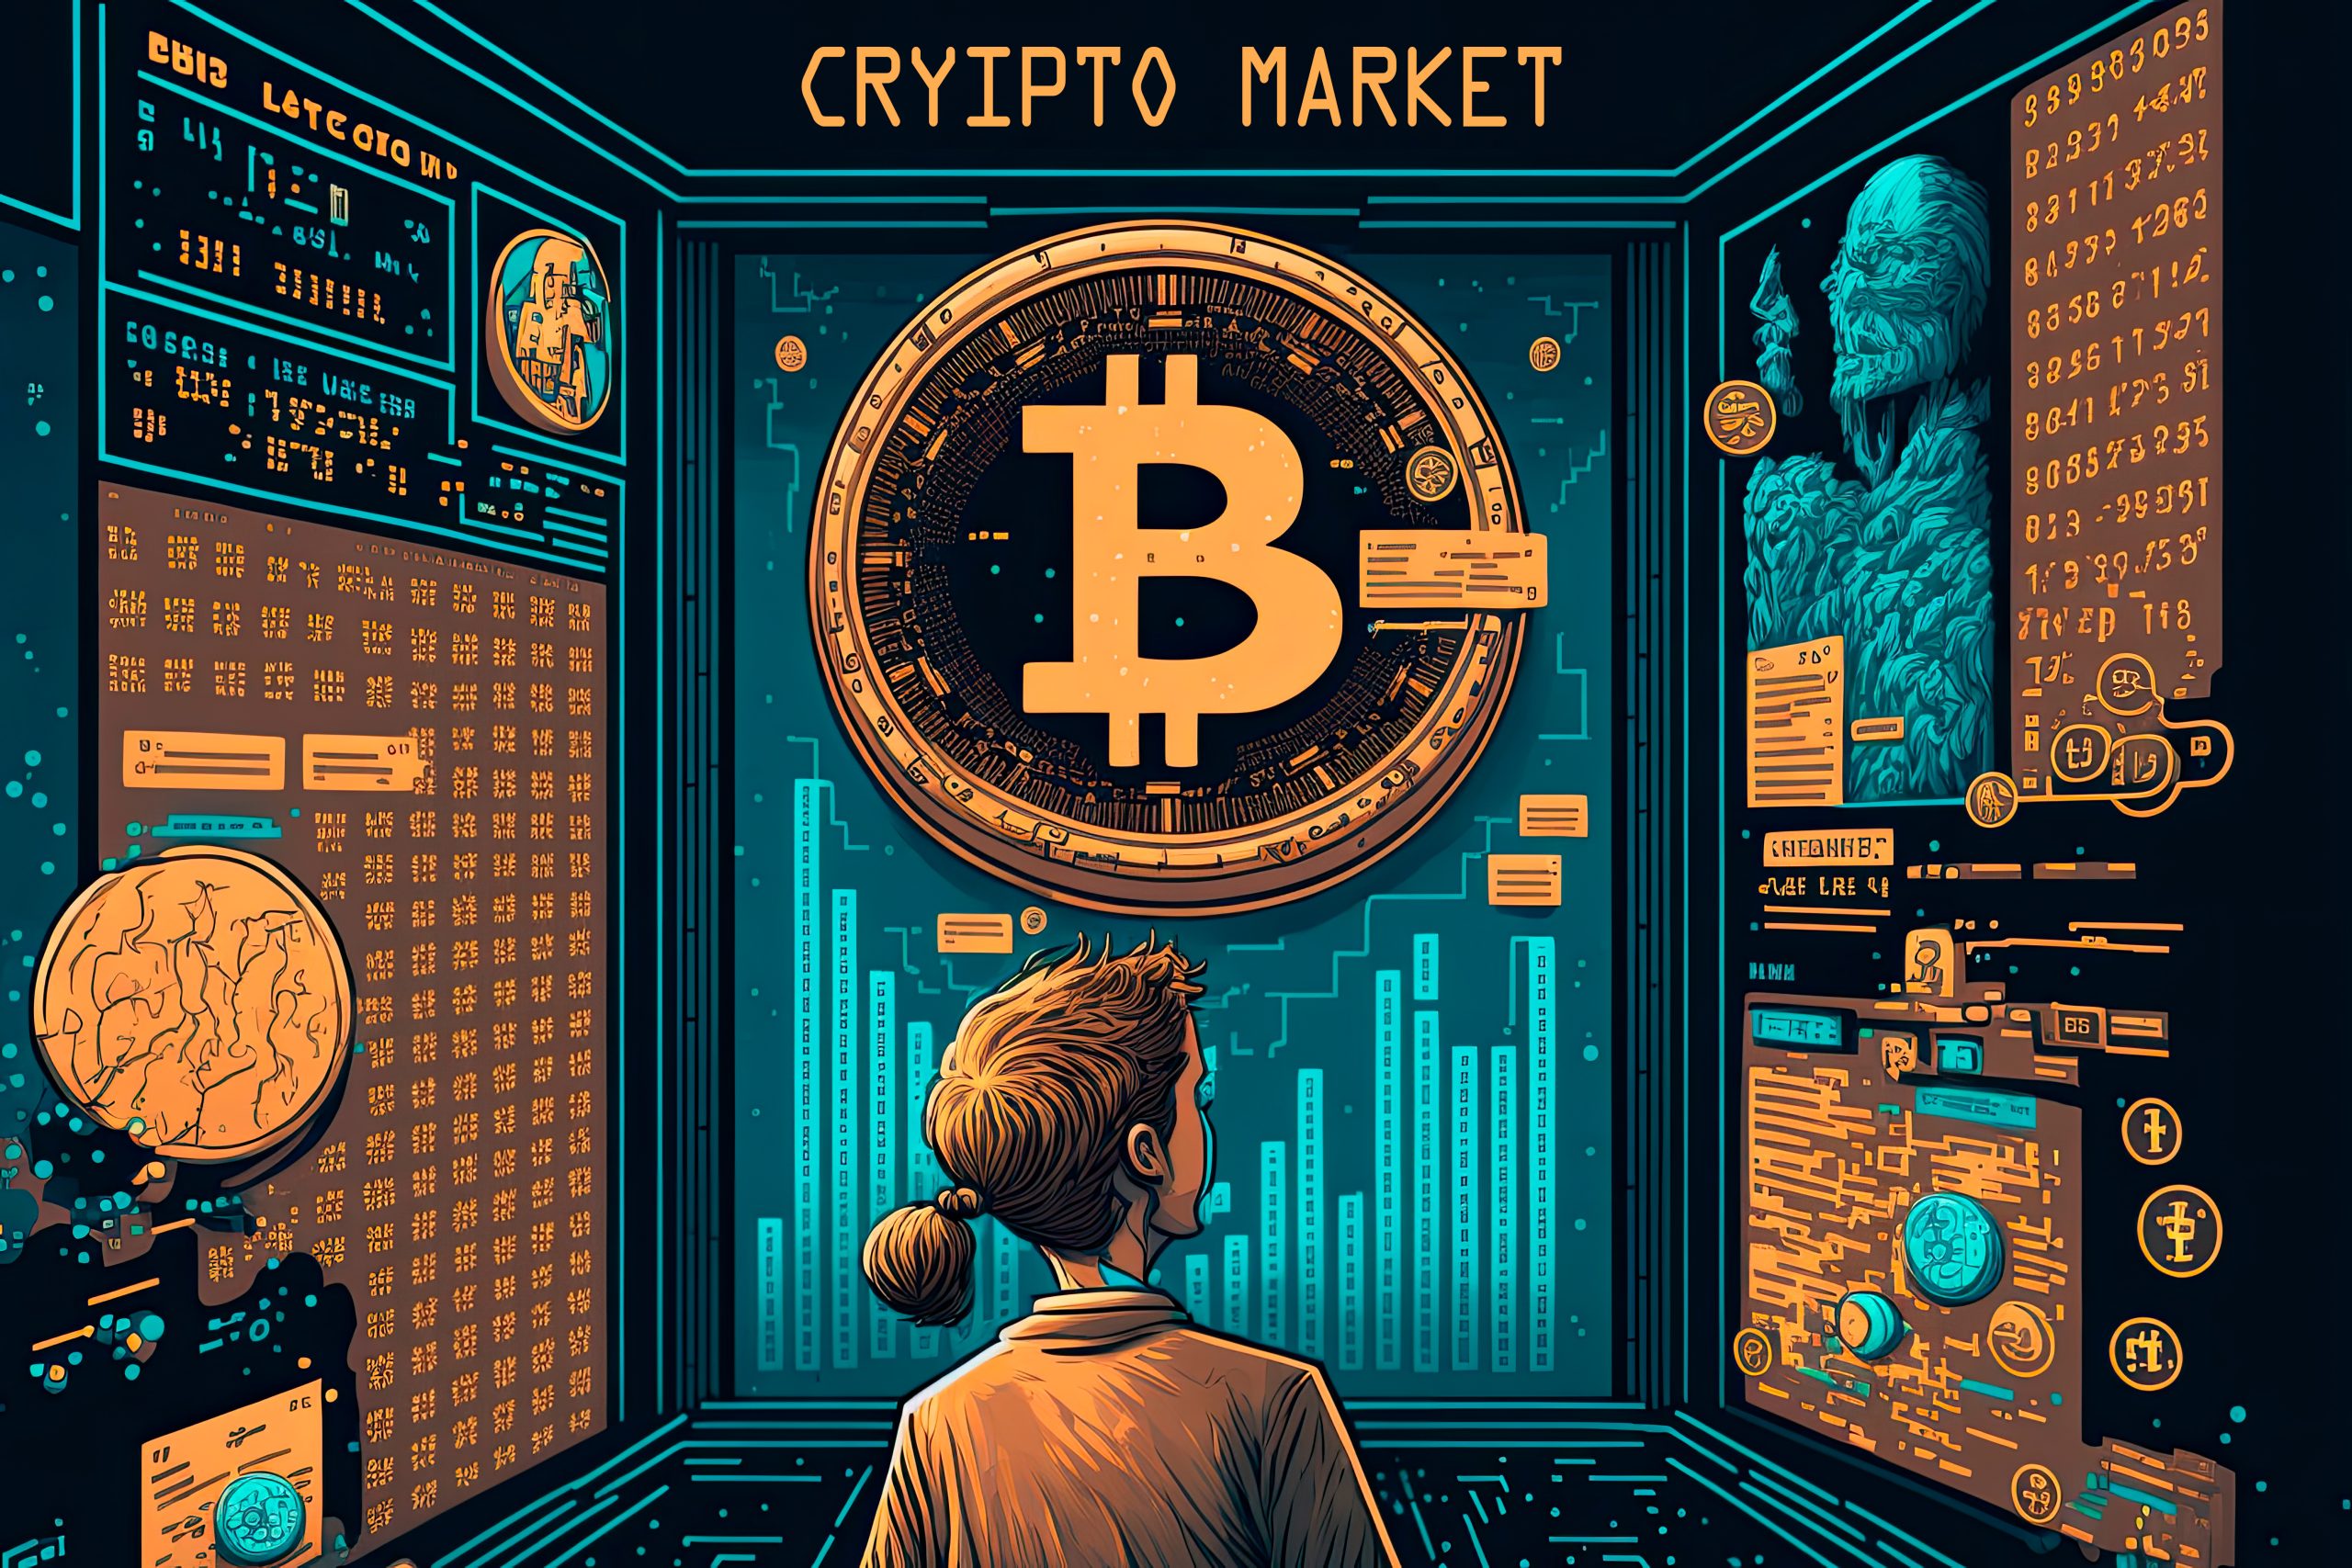 Crypto Assets Under Management Increase 36.7% in January As Markets Recover. But Grayscale Situation Remains “Delicate”